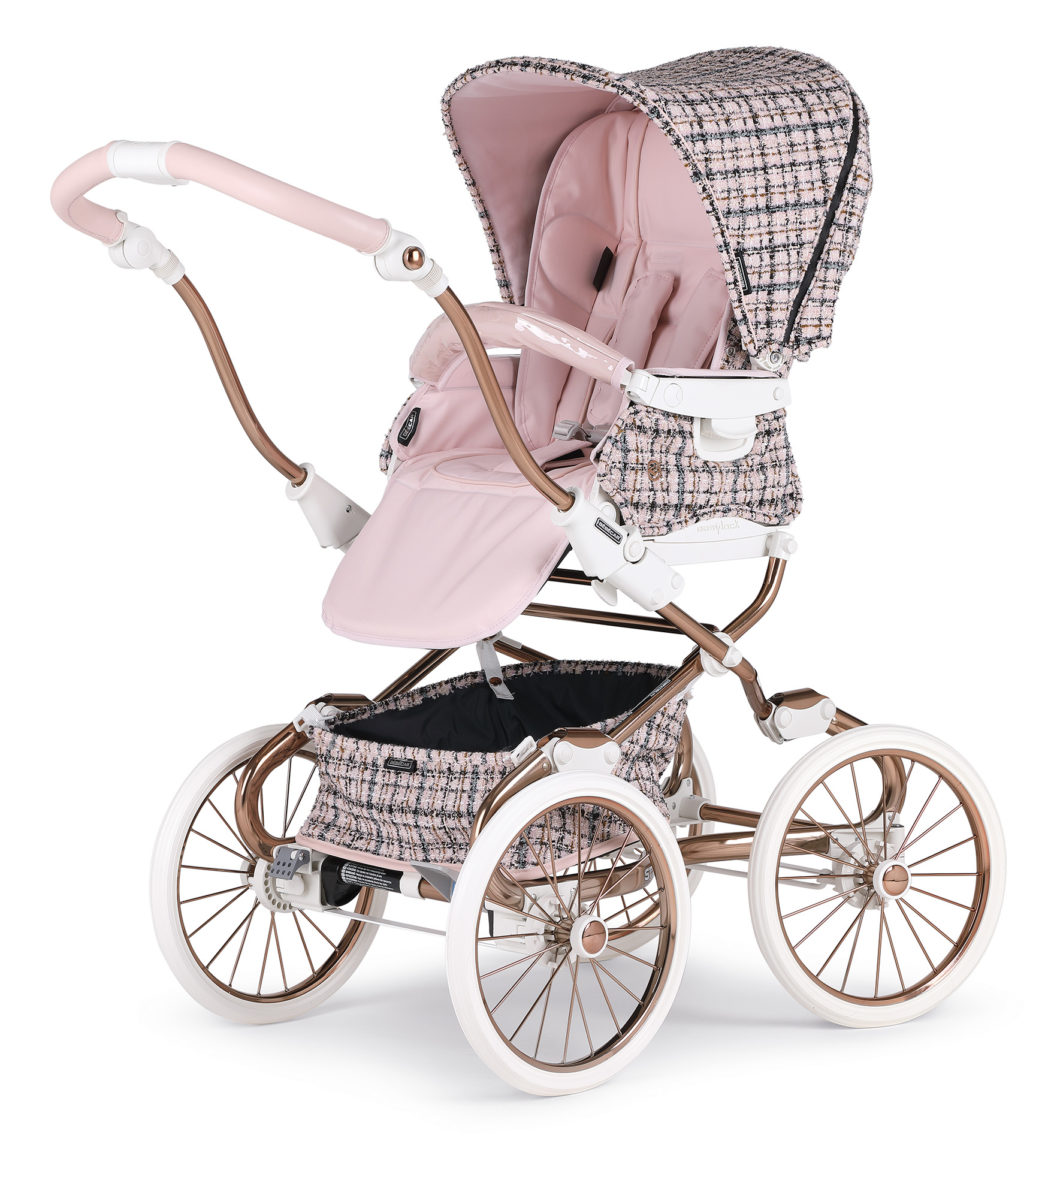 Bebecar Stylo Class Woven Pink2